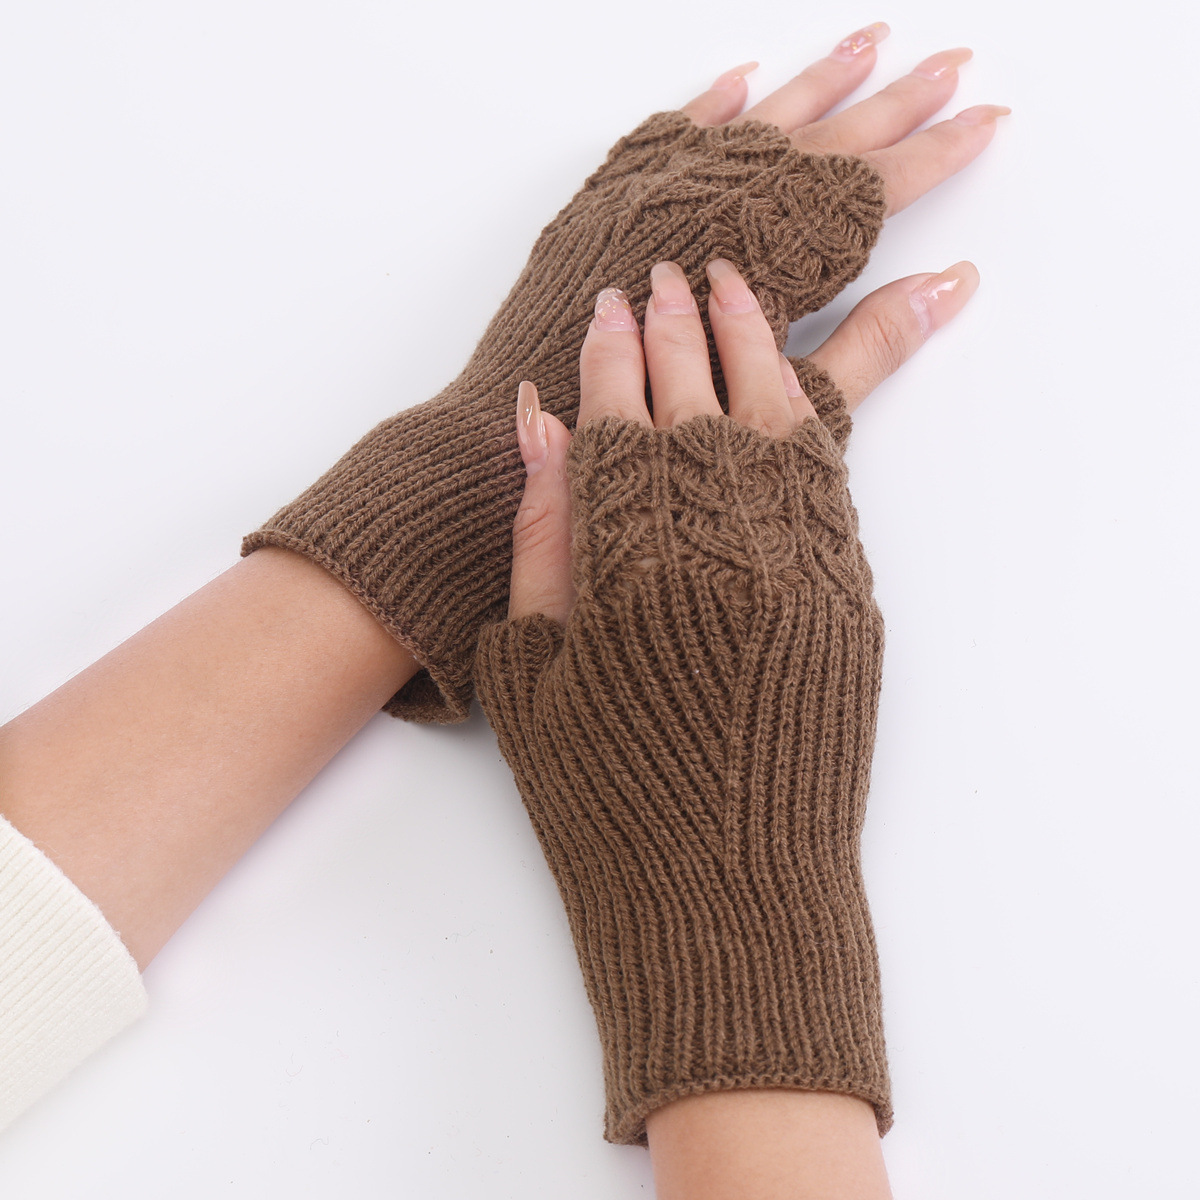  DASAYO Womens Sports Hand Warmers Elastic Long Winter Gloves  Winter Thermal Warm Half Finger Gloves Mittens Work Gloves Gifts :  Clothing, Shoes & Jewelry